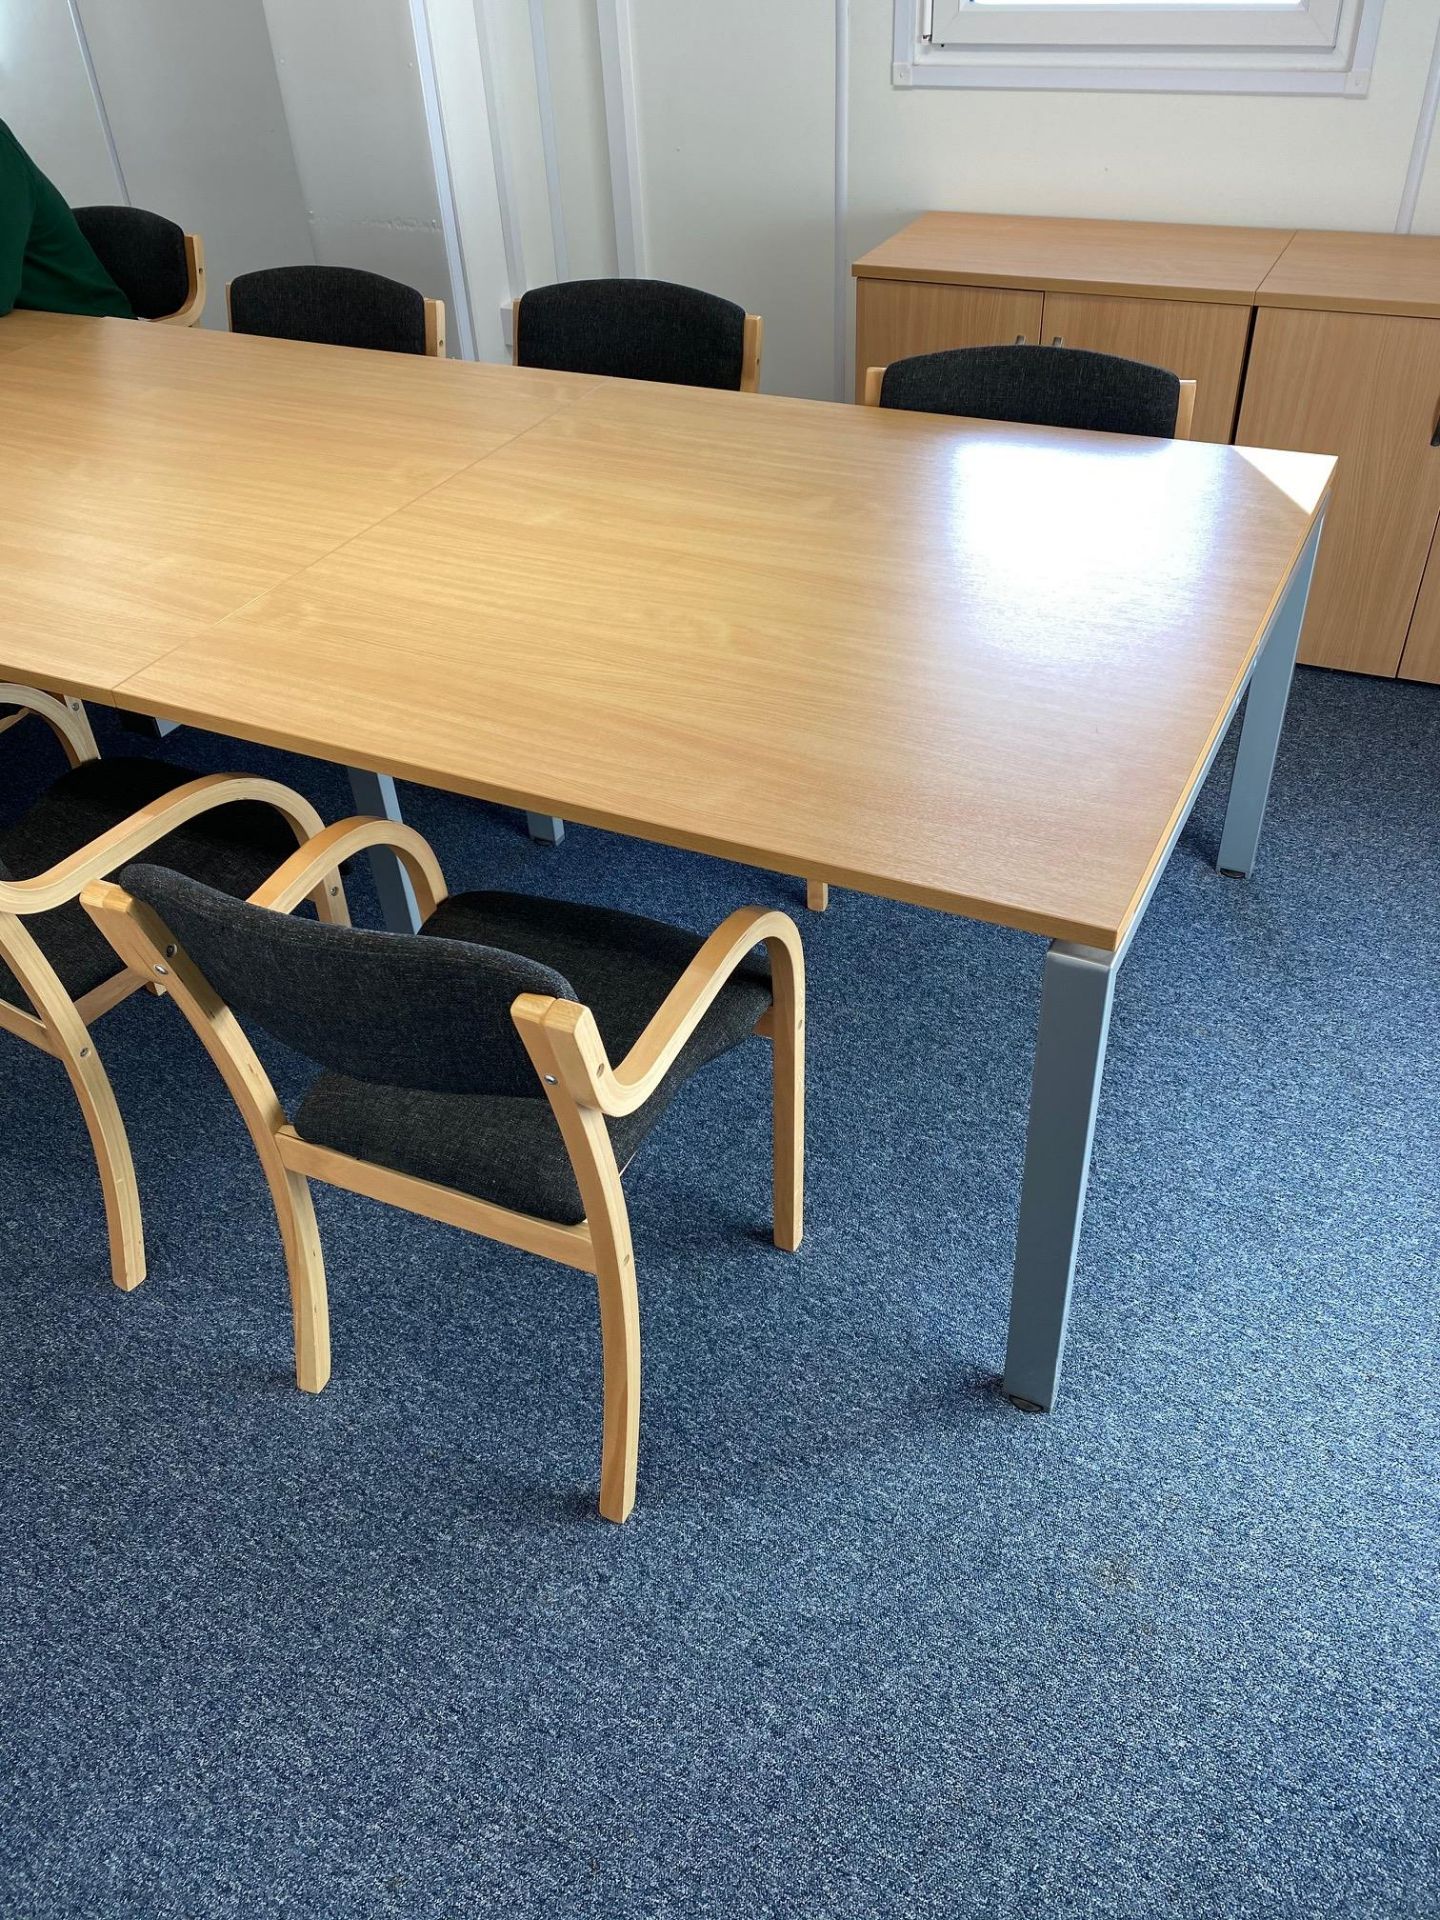 Cleethorpes Room Light Wood Veneered Meeting Table in Four Sections; Each Section 1.1m x 1.2m (Total